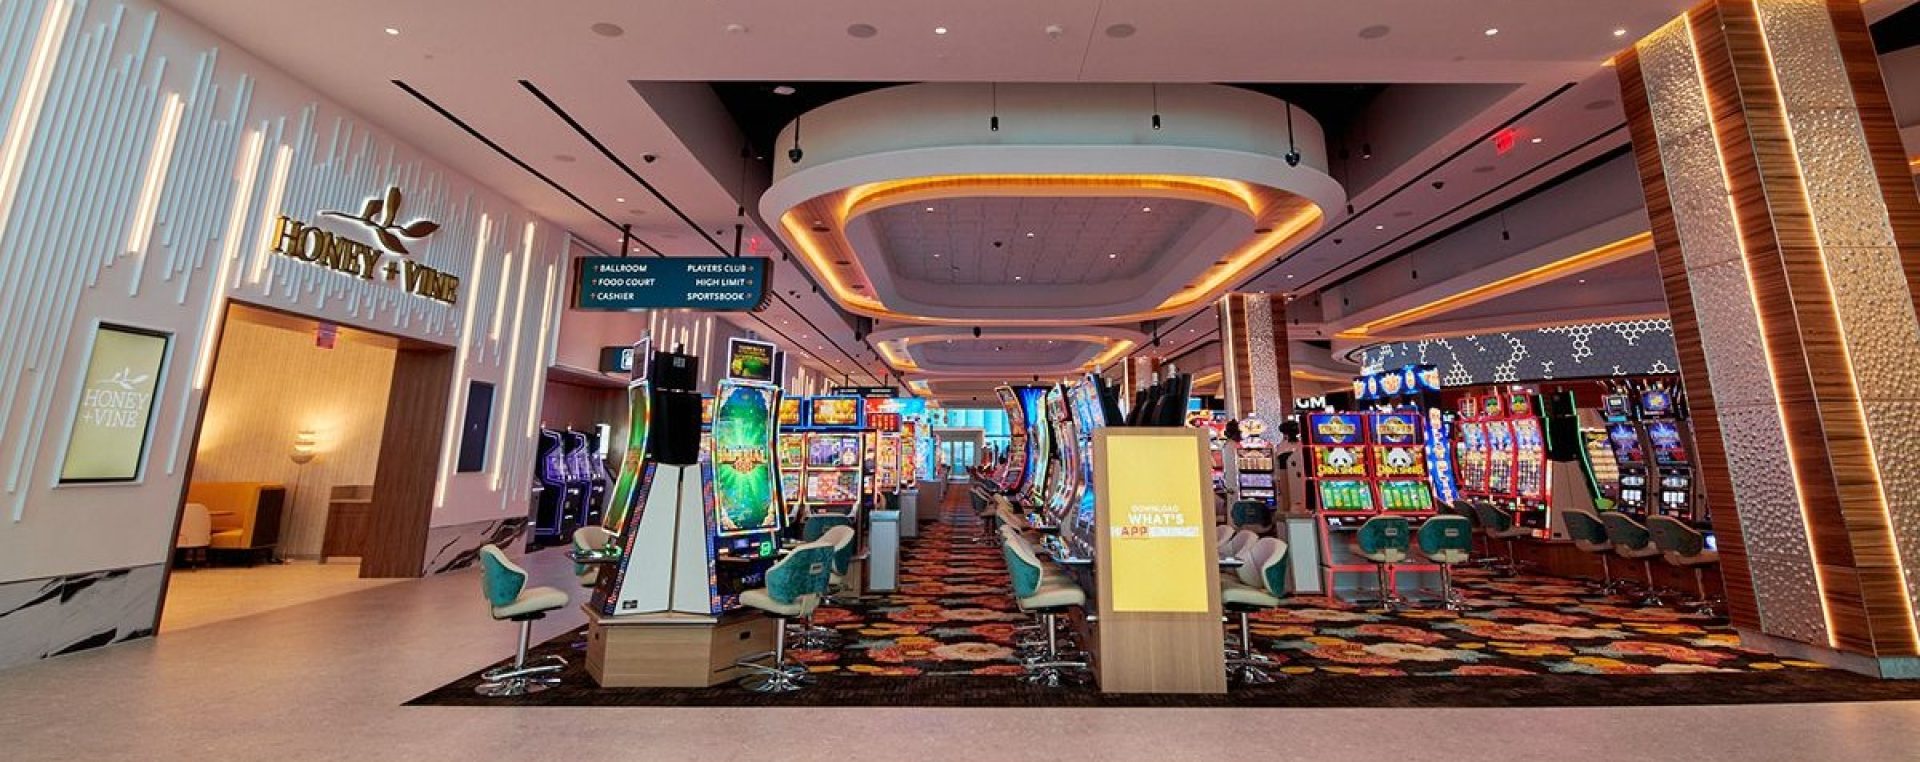 Wide-angle view of a vibrant Arizona casino interior with colorful slot machines, promotional displays, and plush seating under a modern lighting arrangement.